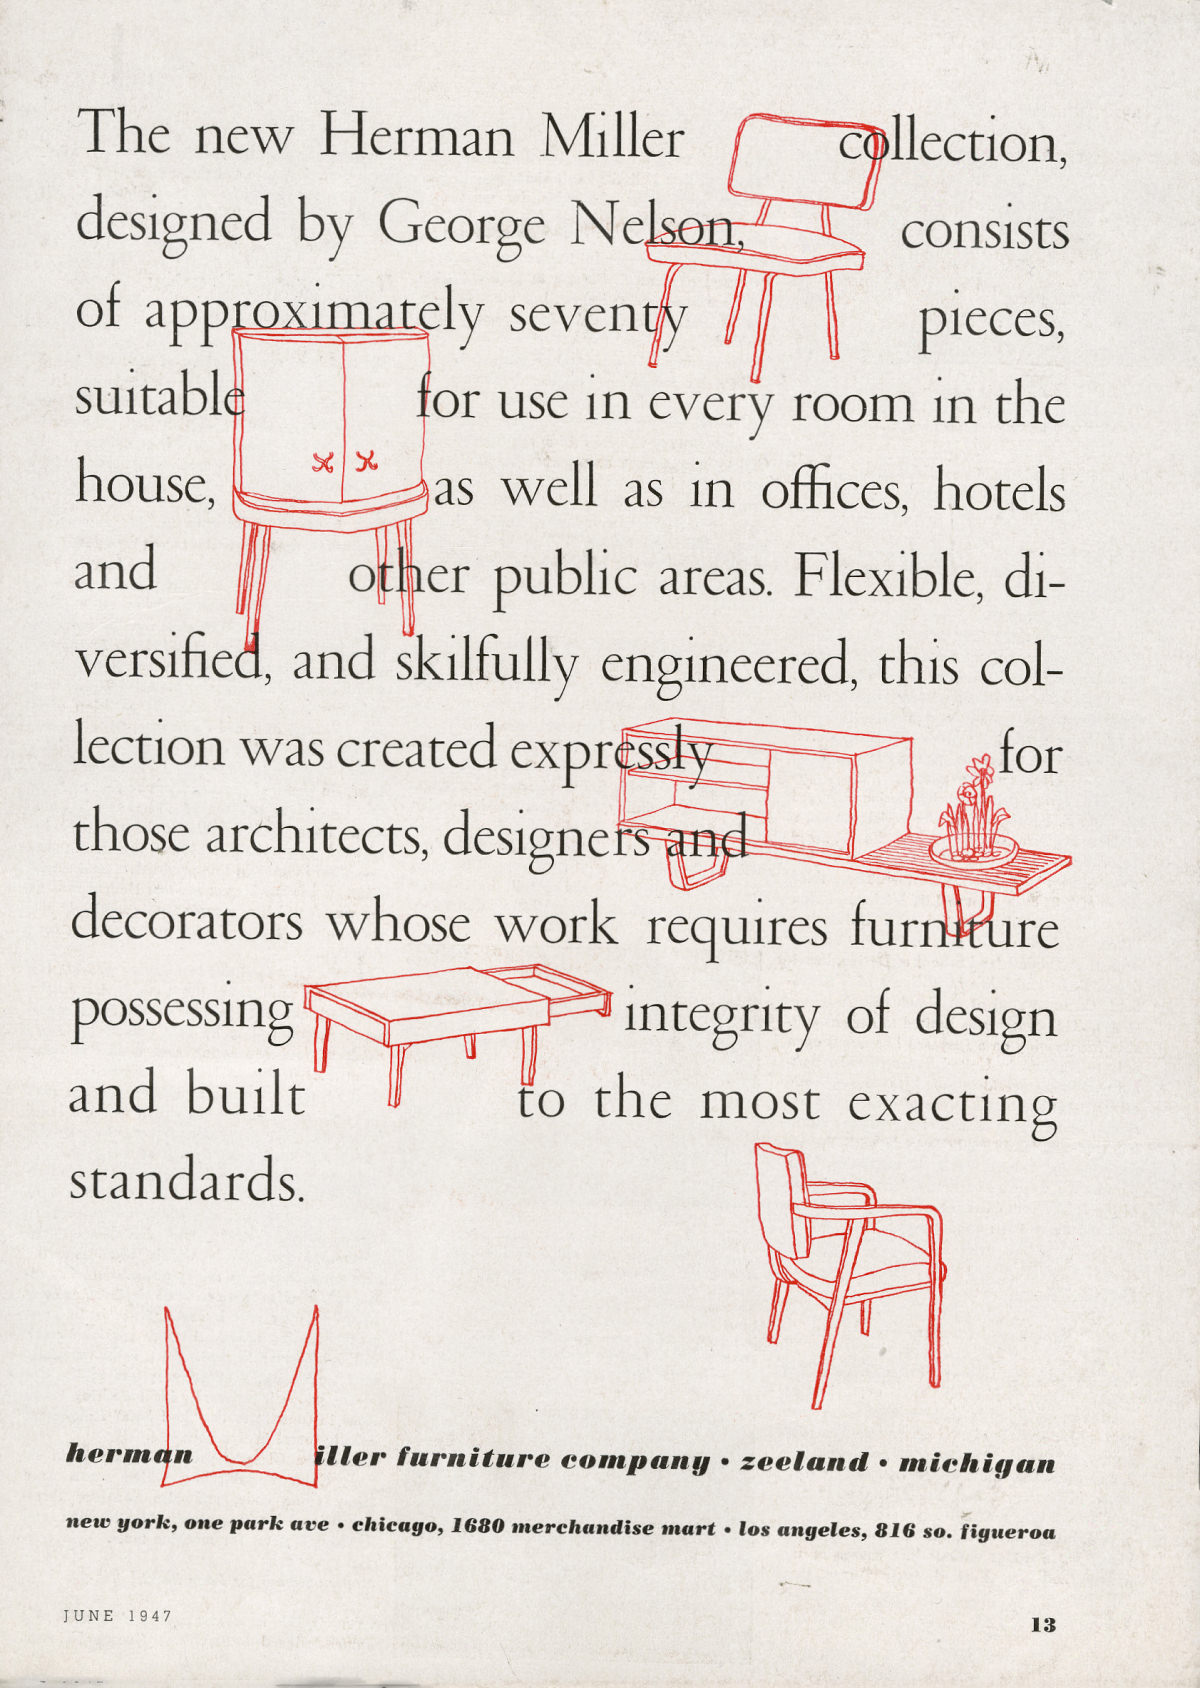 Illustrations of furniture pieces, including items from Basic Cabinet Series, are interwoven within promotional text describing George Nelson’s first collection for Herman Miller.